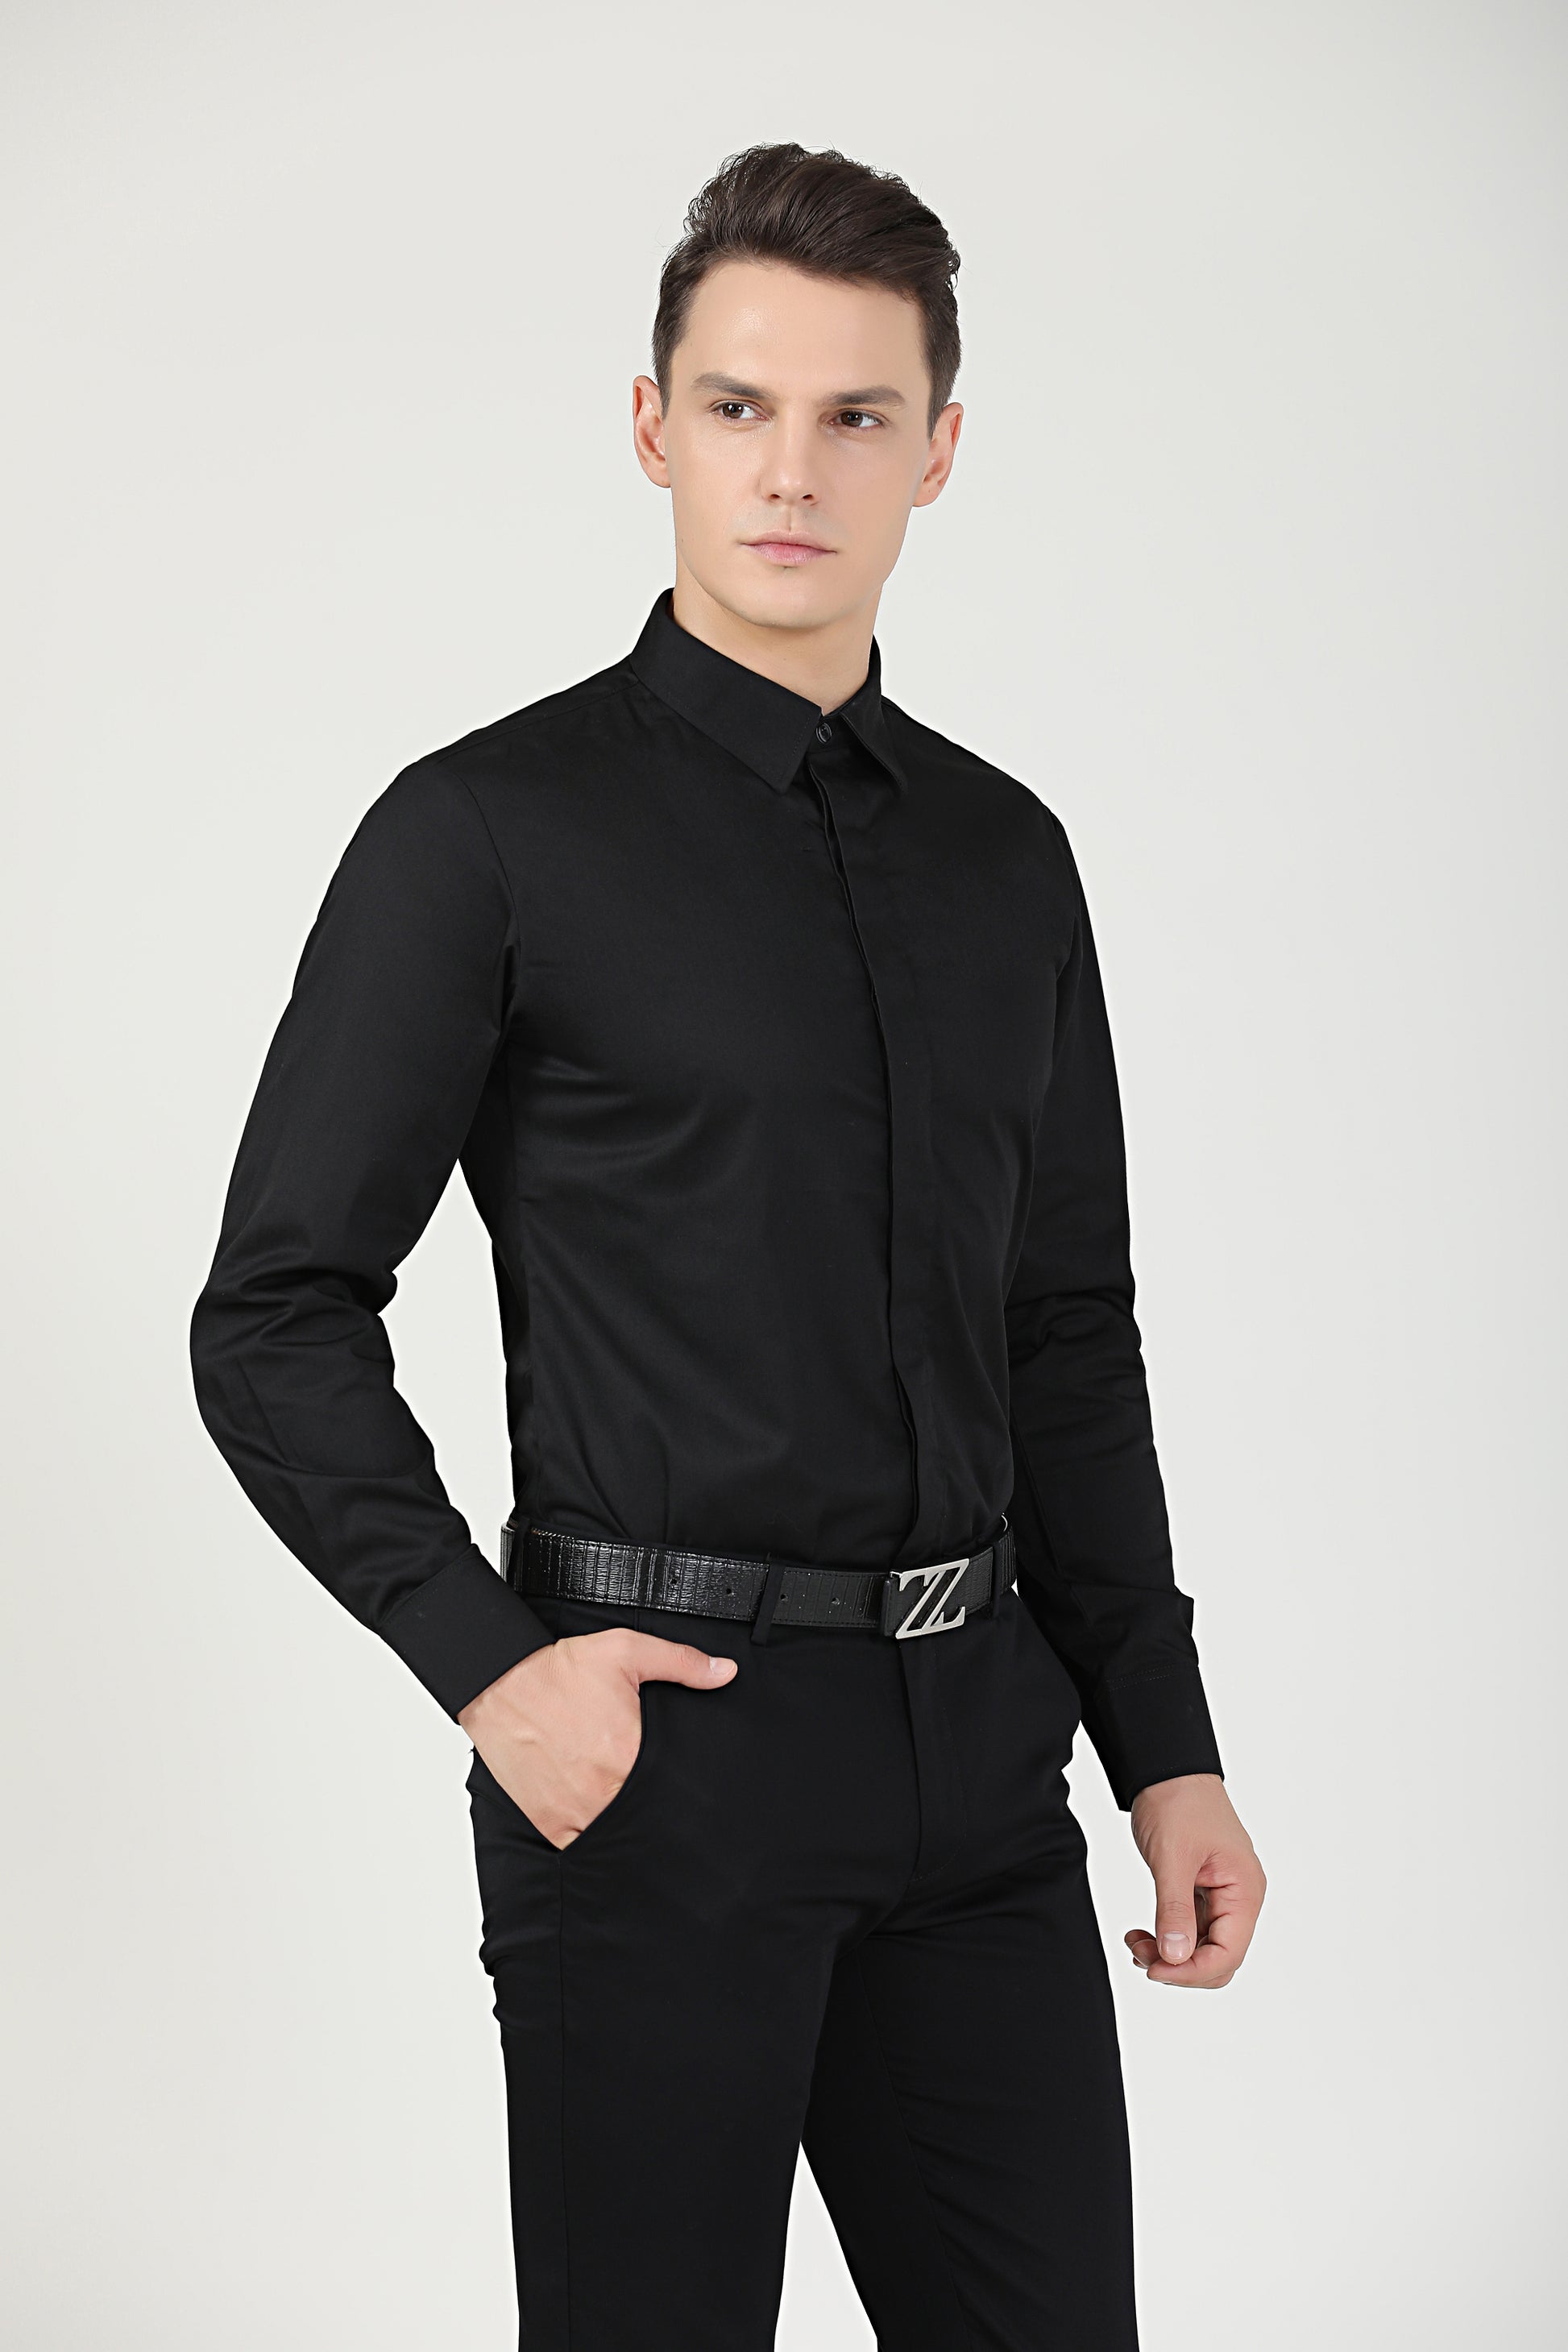 GreenChef by GC Collective – Service Shirt Long Sleeve, Black, Unisex –  GreenChef Sdn. Bhd.